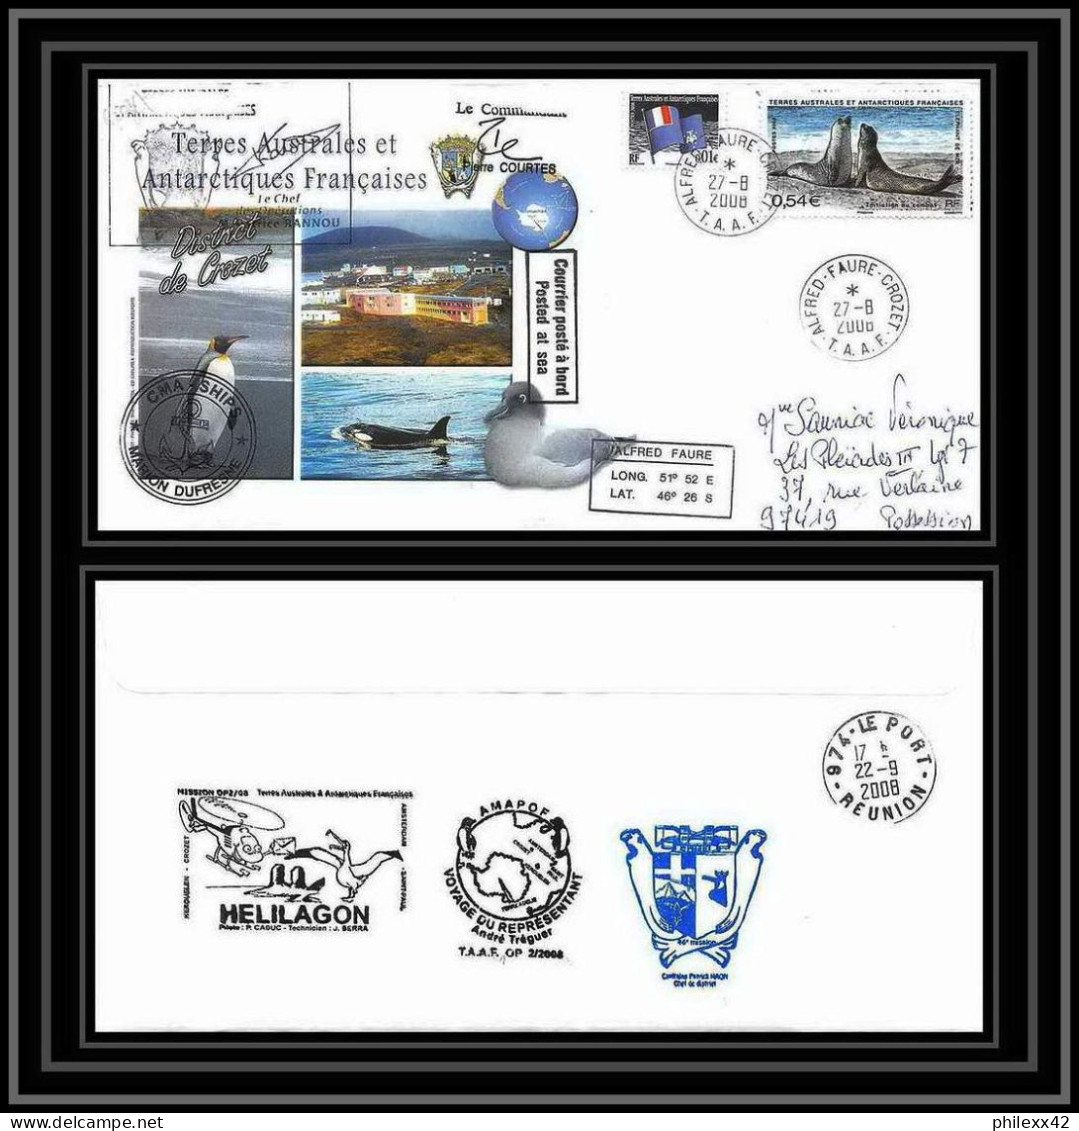 2824 Sea Elephant Terres Australes TAAF Helilagon Lettre Cover Dufresne Signé Signed Op 2008/2 CROZET N°512 27/8/2008 - Helicopters